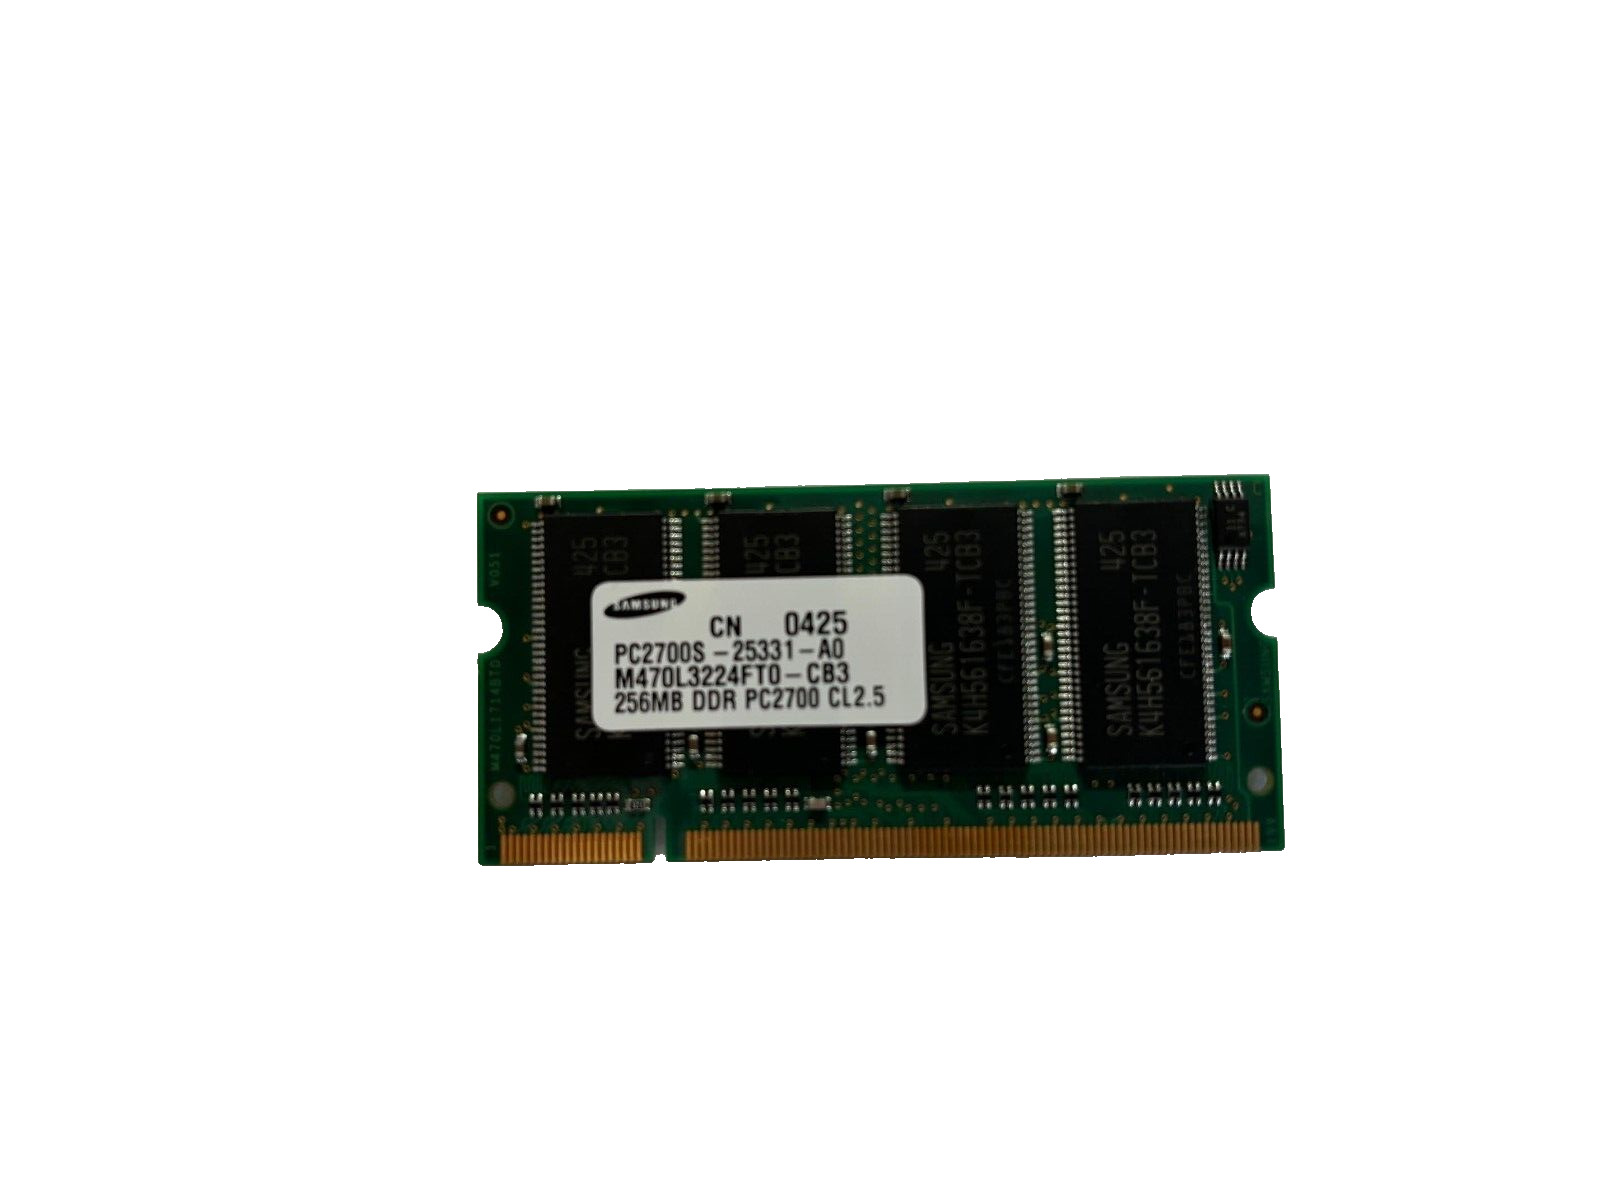 SAMSUNG 256MB DDR PC2700 CL2.5| PC2700S - 25331 - AO MEMORY